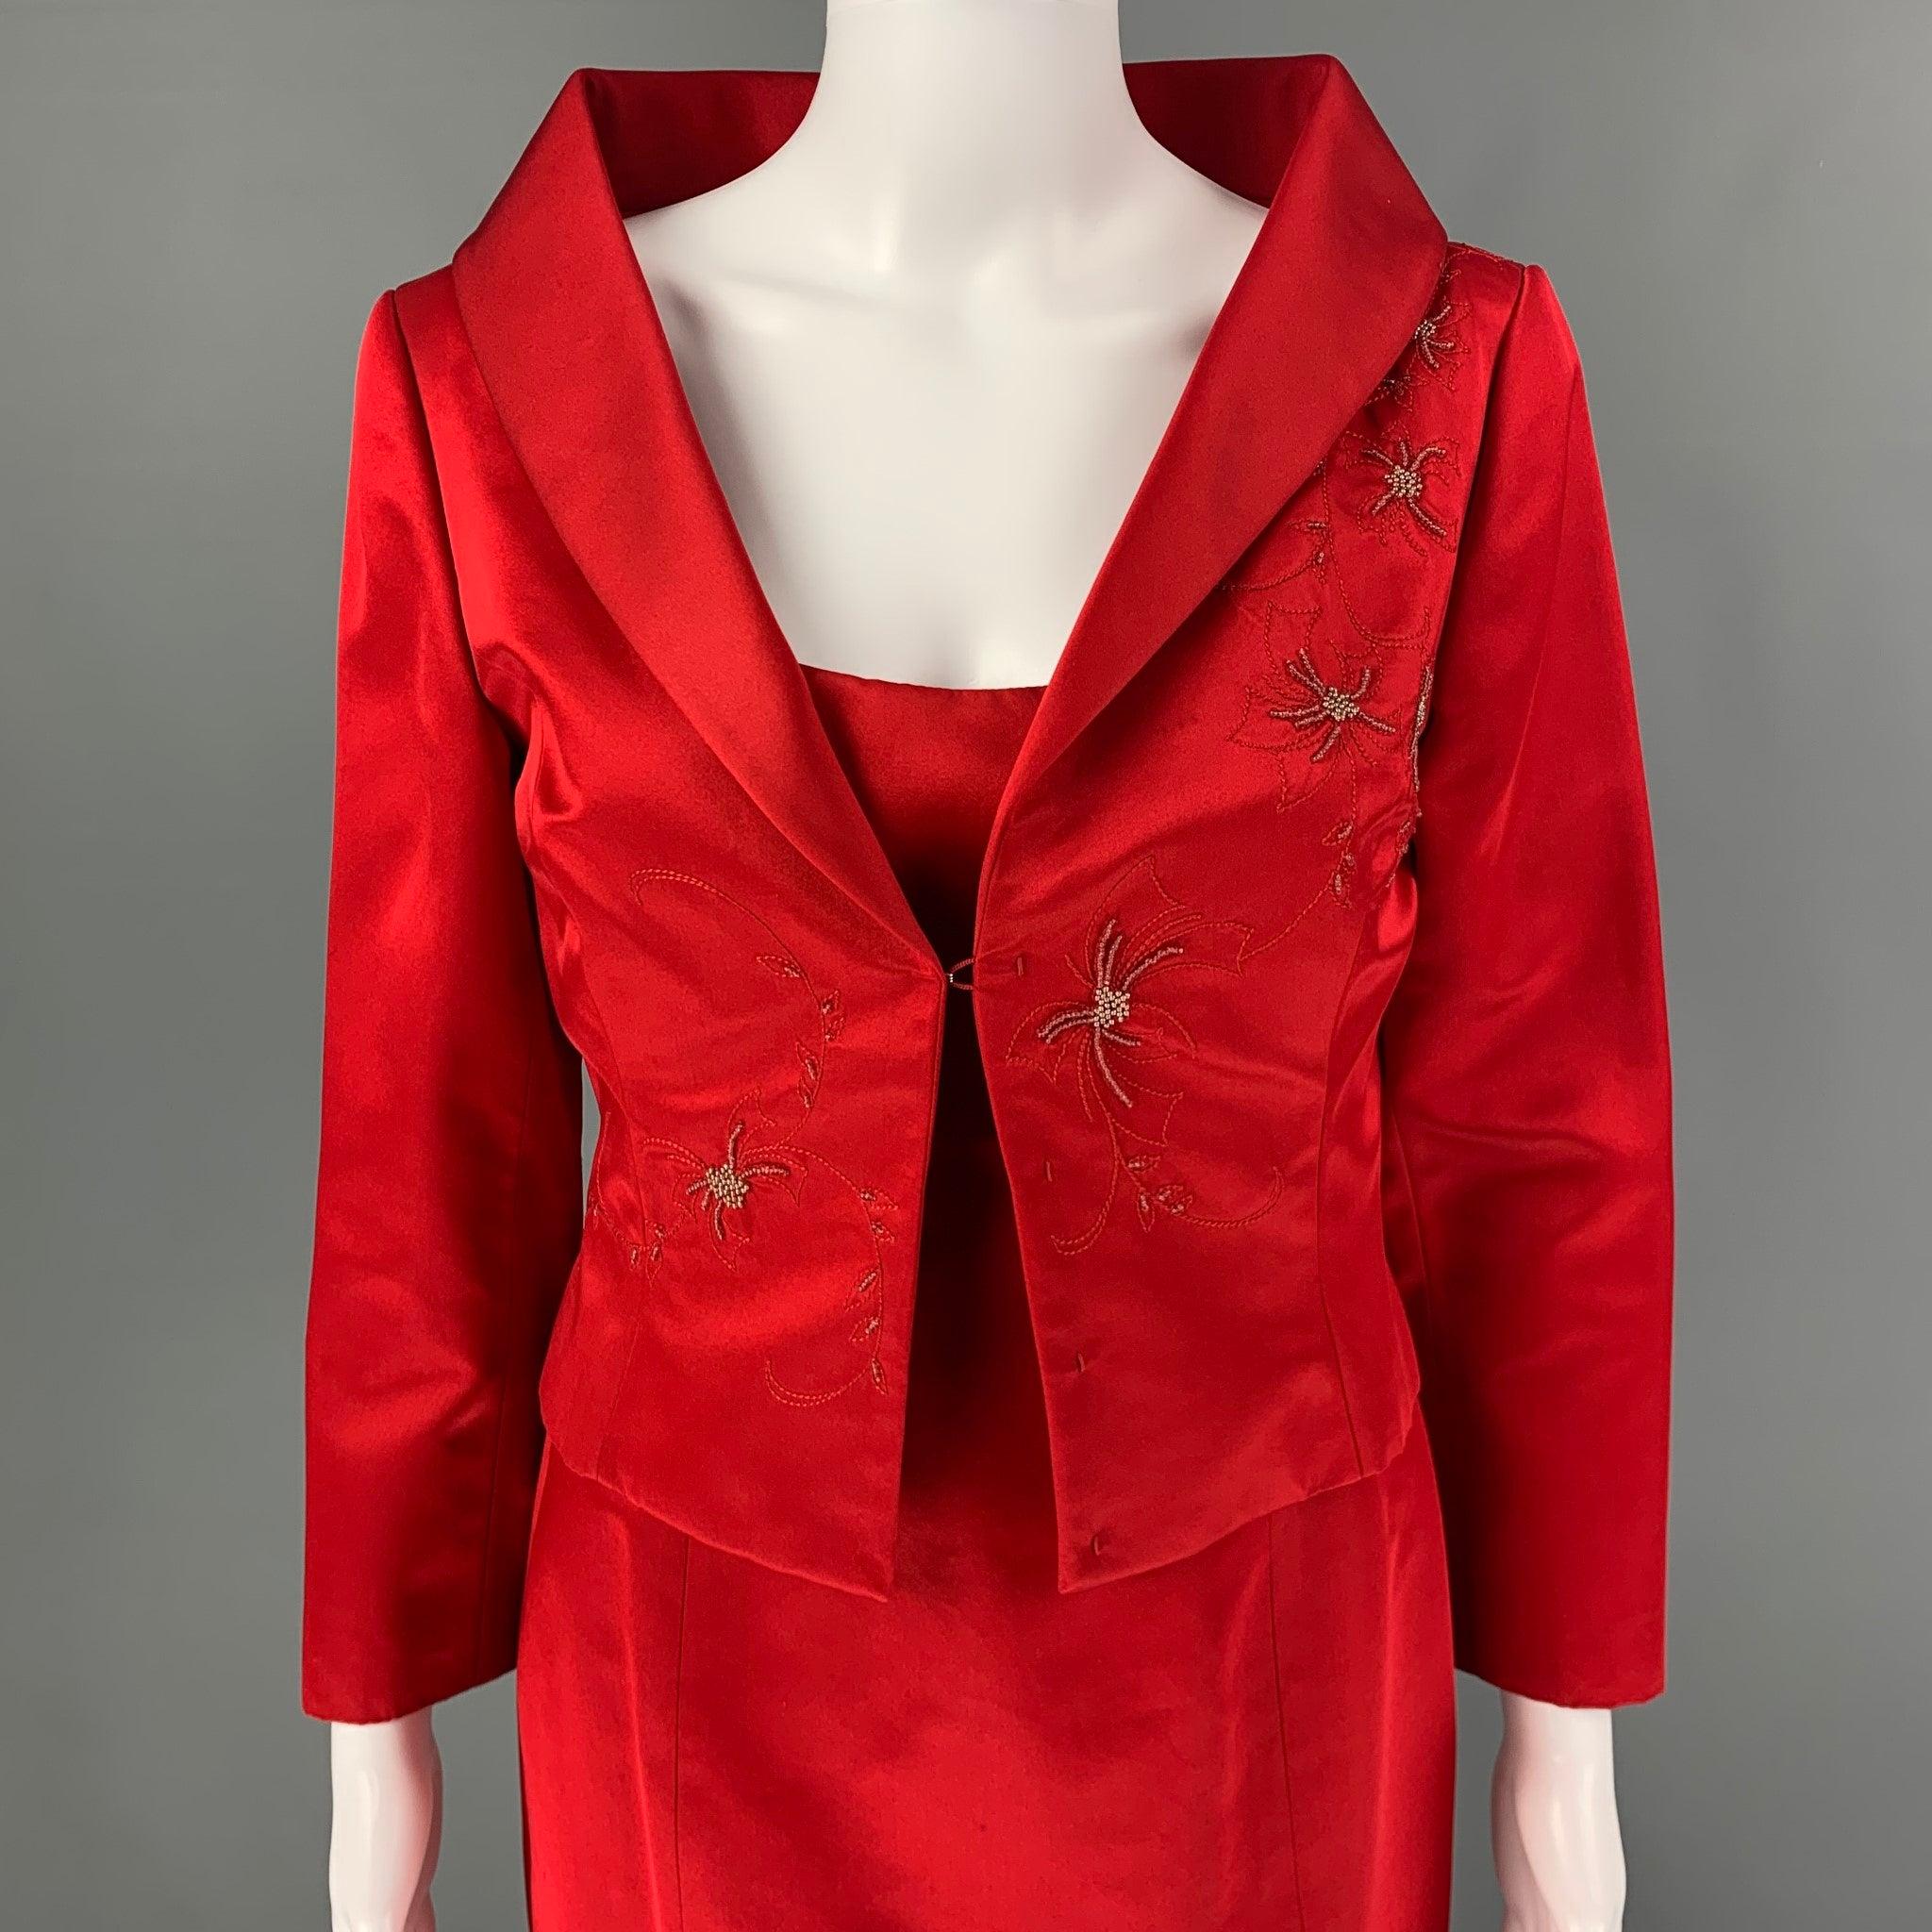 RICHARD TYLER Couture 2 Piece Set comes in a red silk / rayon featuring an a-line style dress, elastic straps, side zipper closure, and a includes a shawl collar jacket with beaded embellishments.
Excellent
Pre-Owned Condition. 

Marked:   8